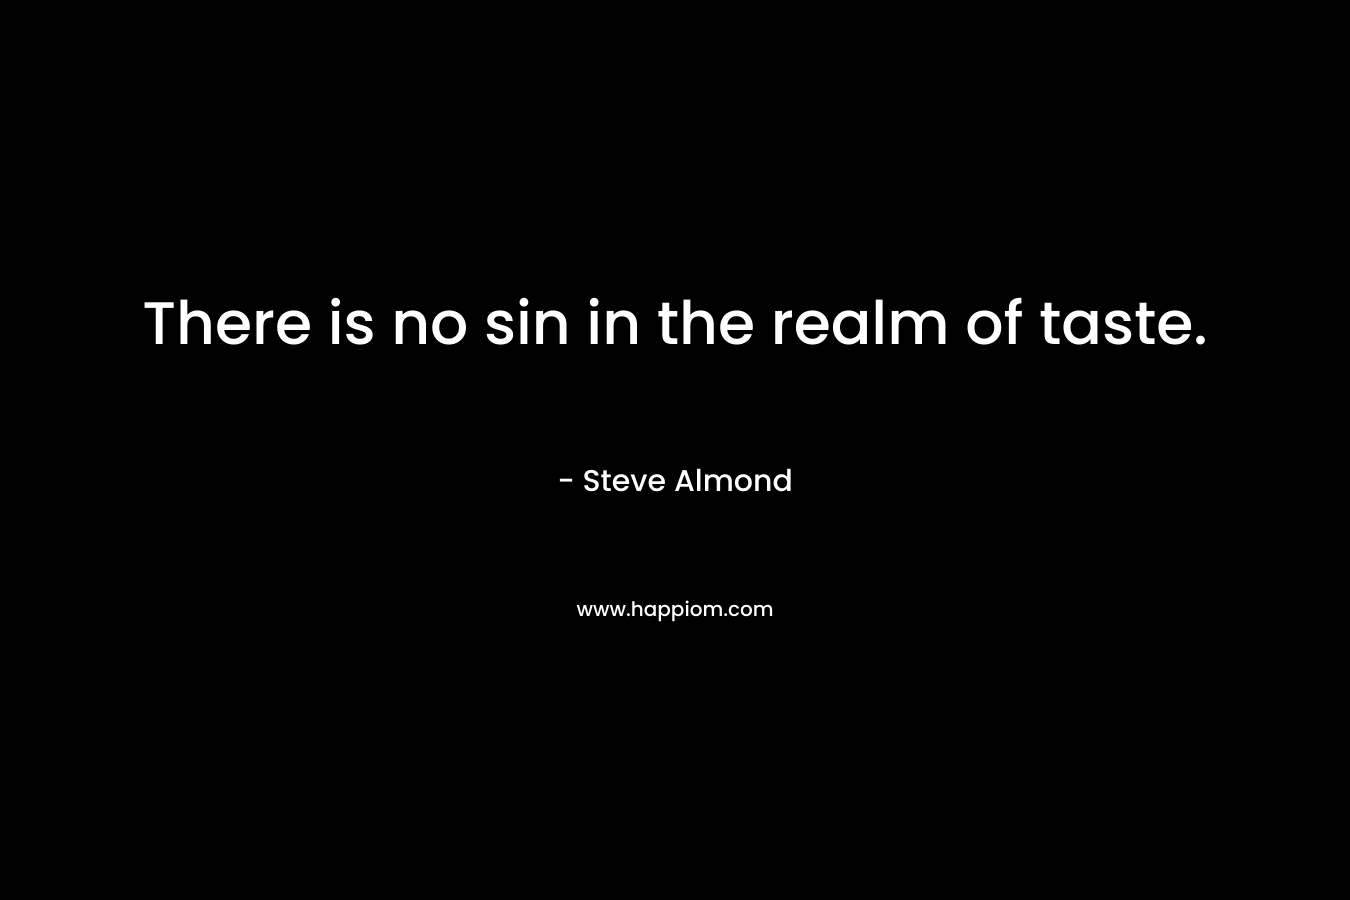 There is no sin in the realm of taste.